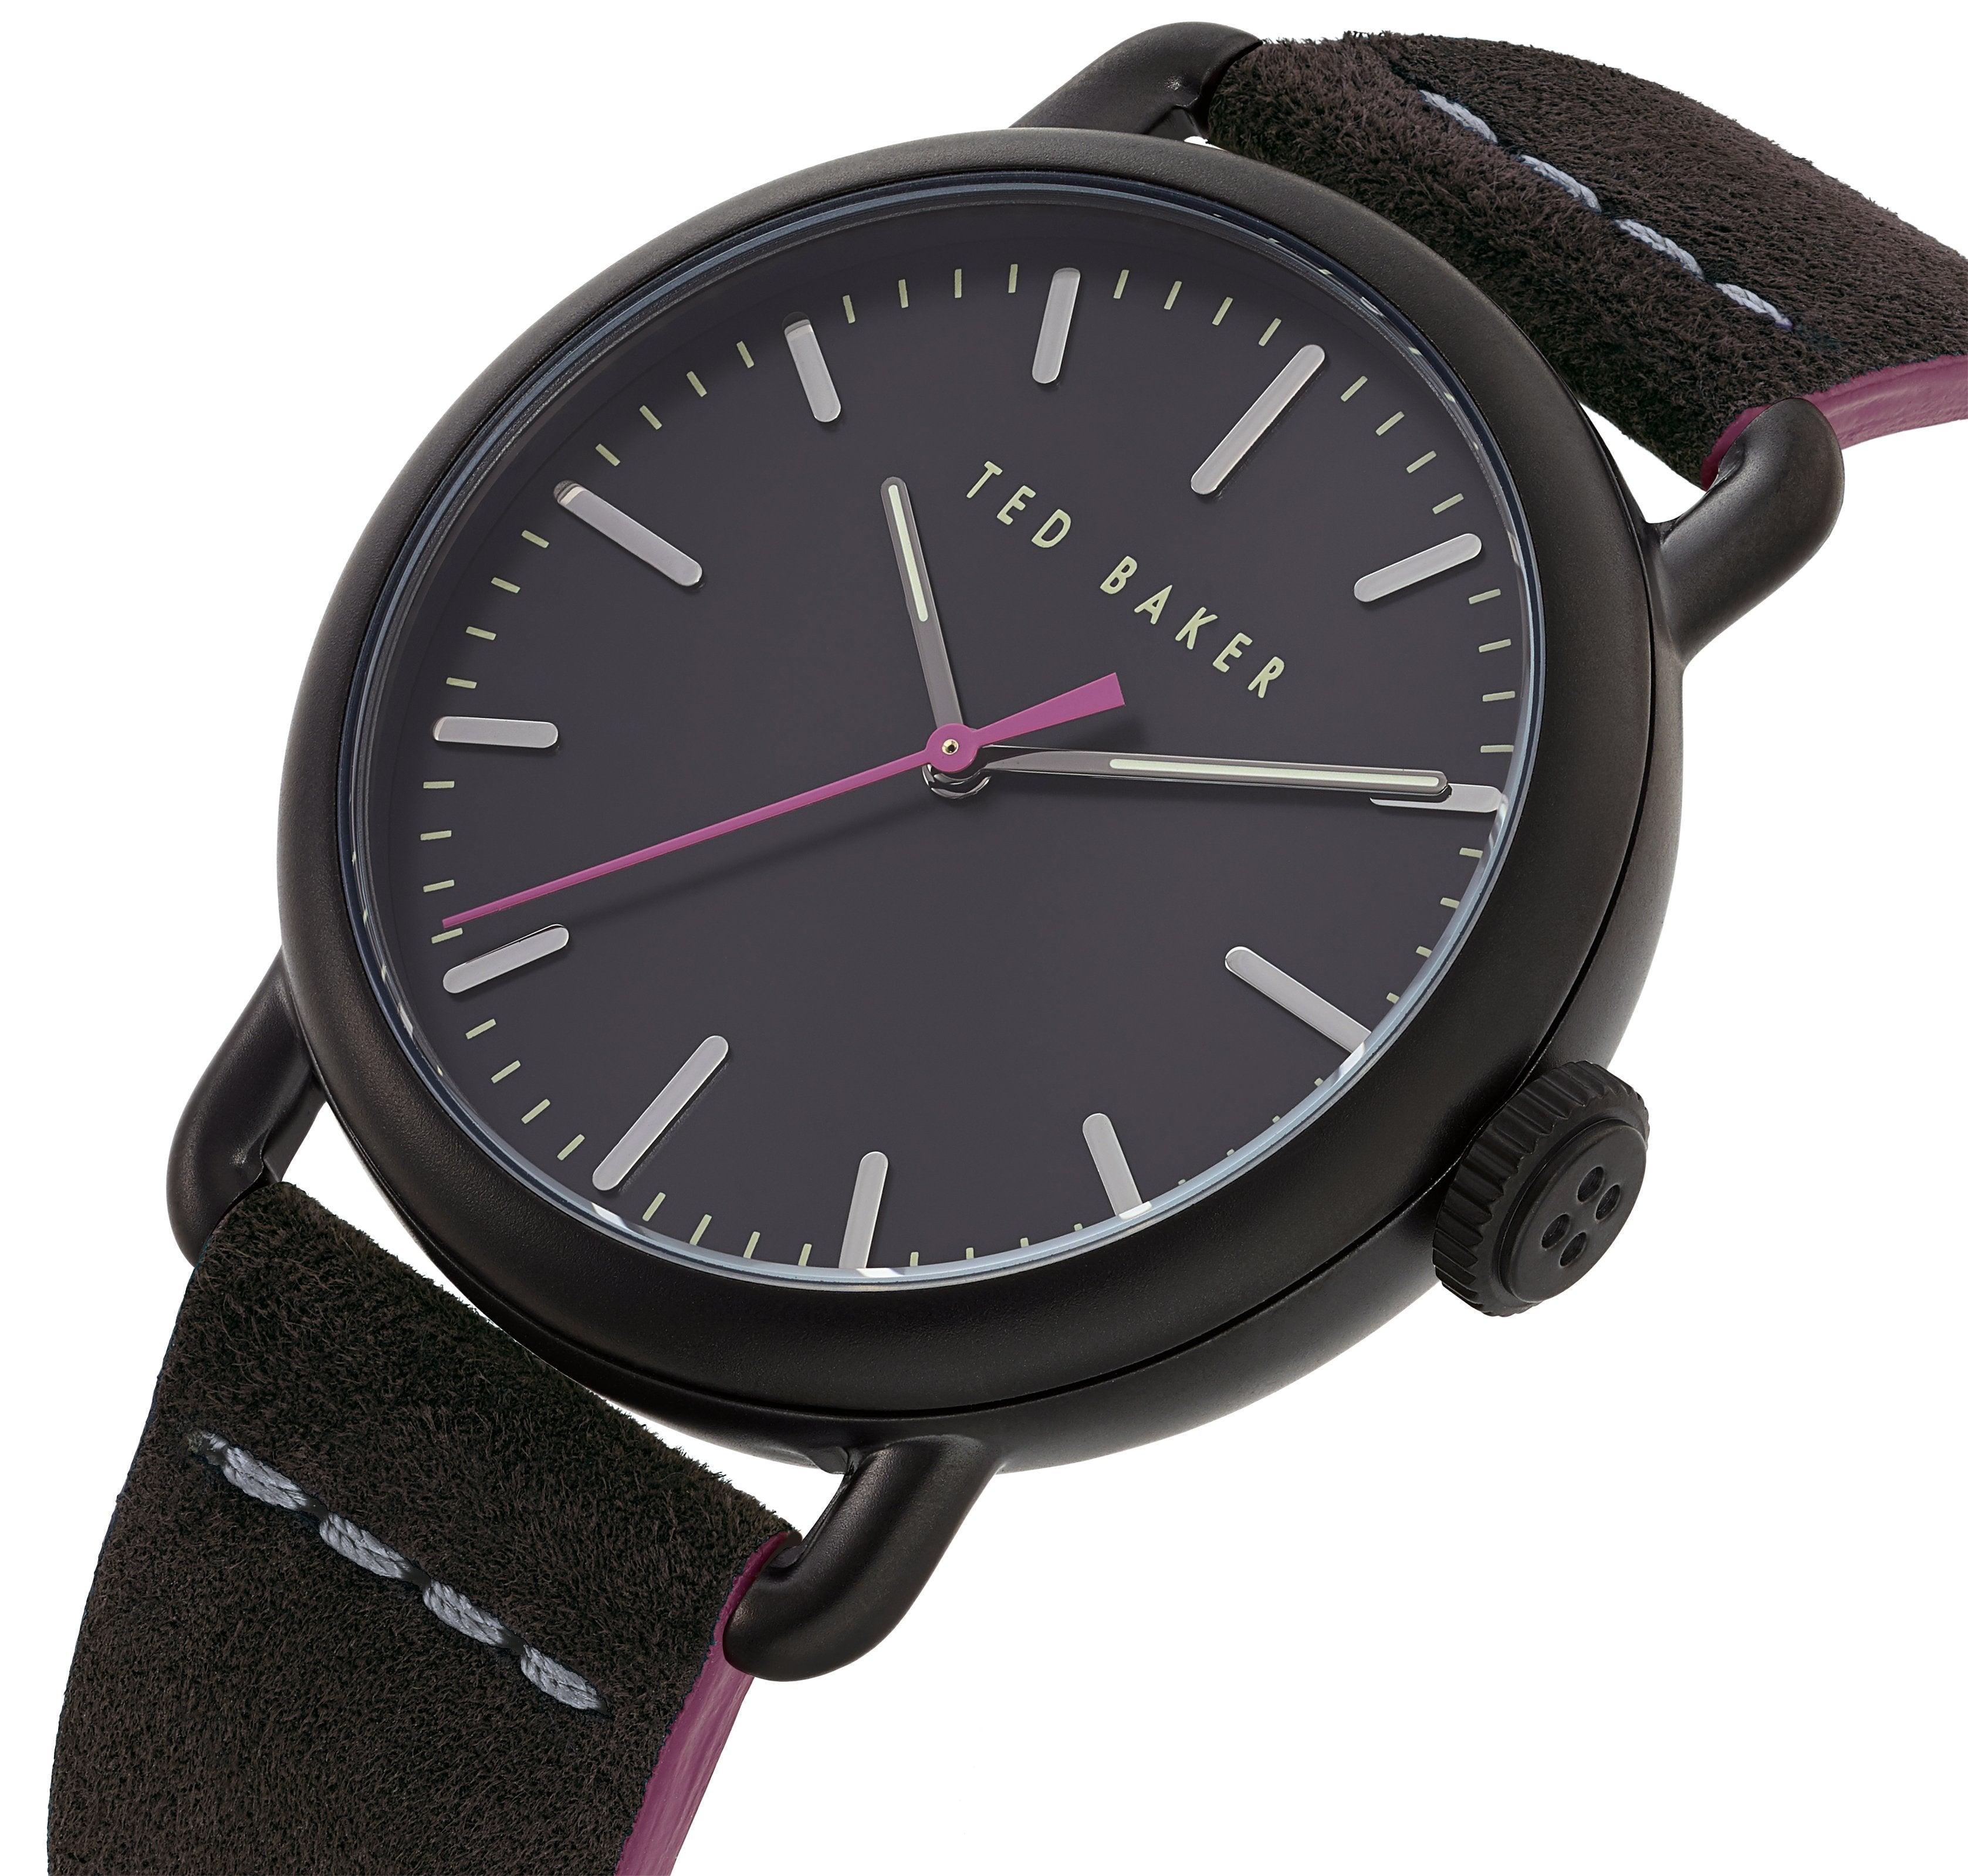 Ted Baker Tomcoll Black Watch